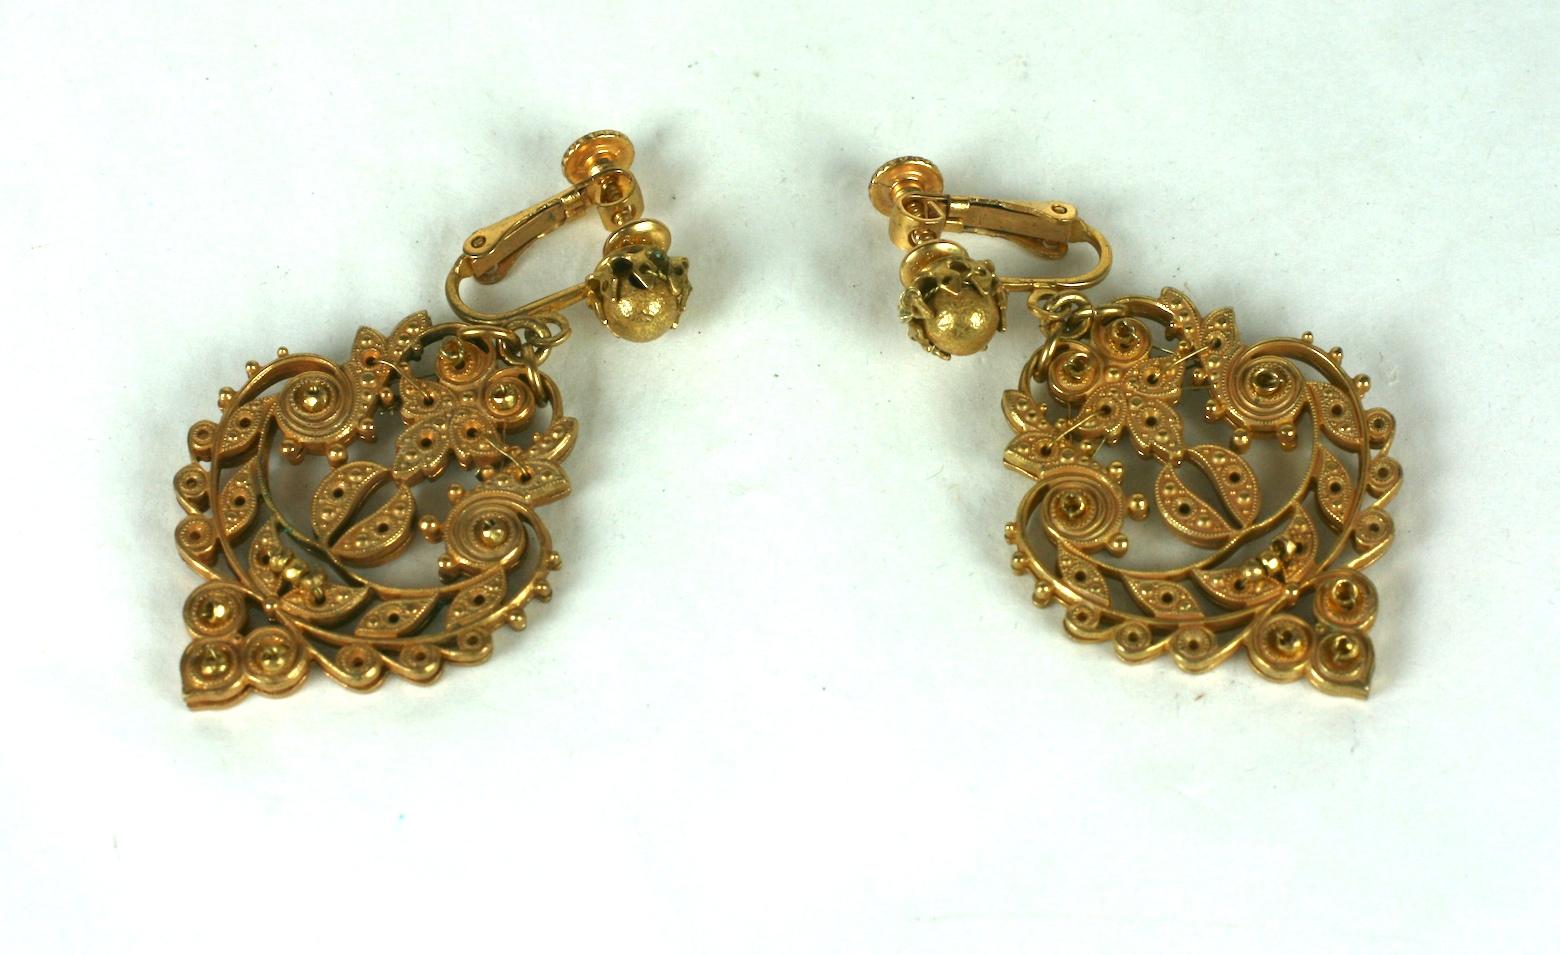 Miriam Haskell signature Russian Gilt Etruscan Revival pendant earrings. Made of  back to back gilt filigrees, textured gilt brass beads, accented with small gold plate cut steel beads.
Excellent Condition, Signed, Clip Back Fittings
Length 2